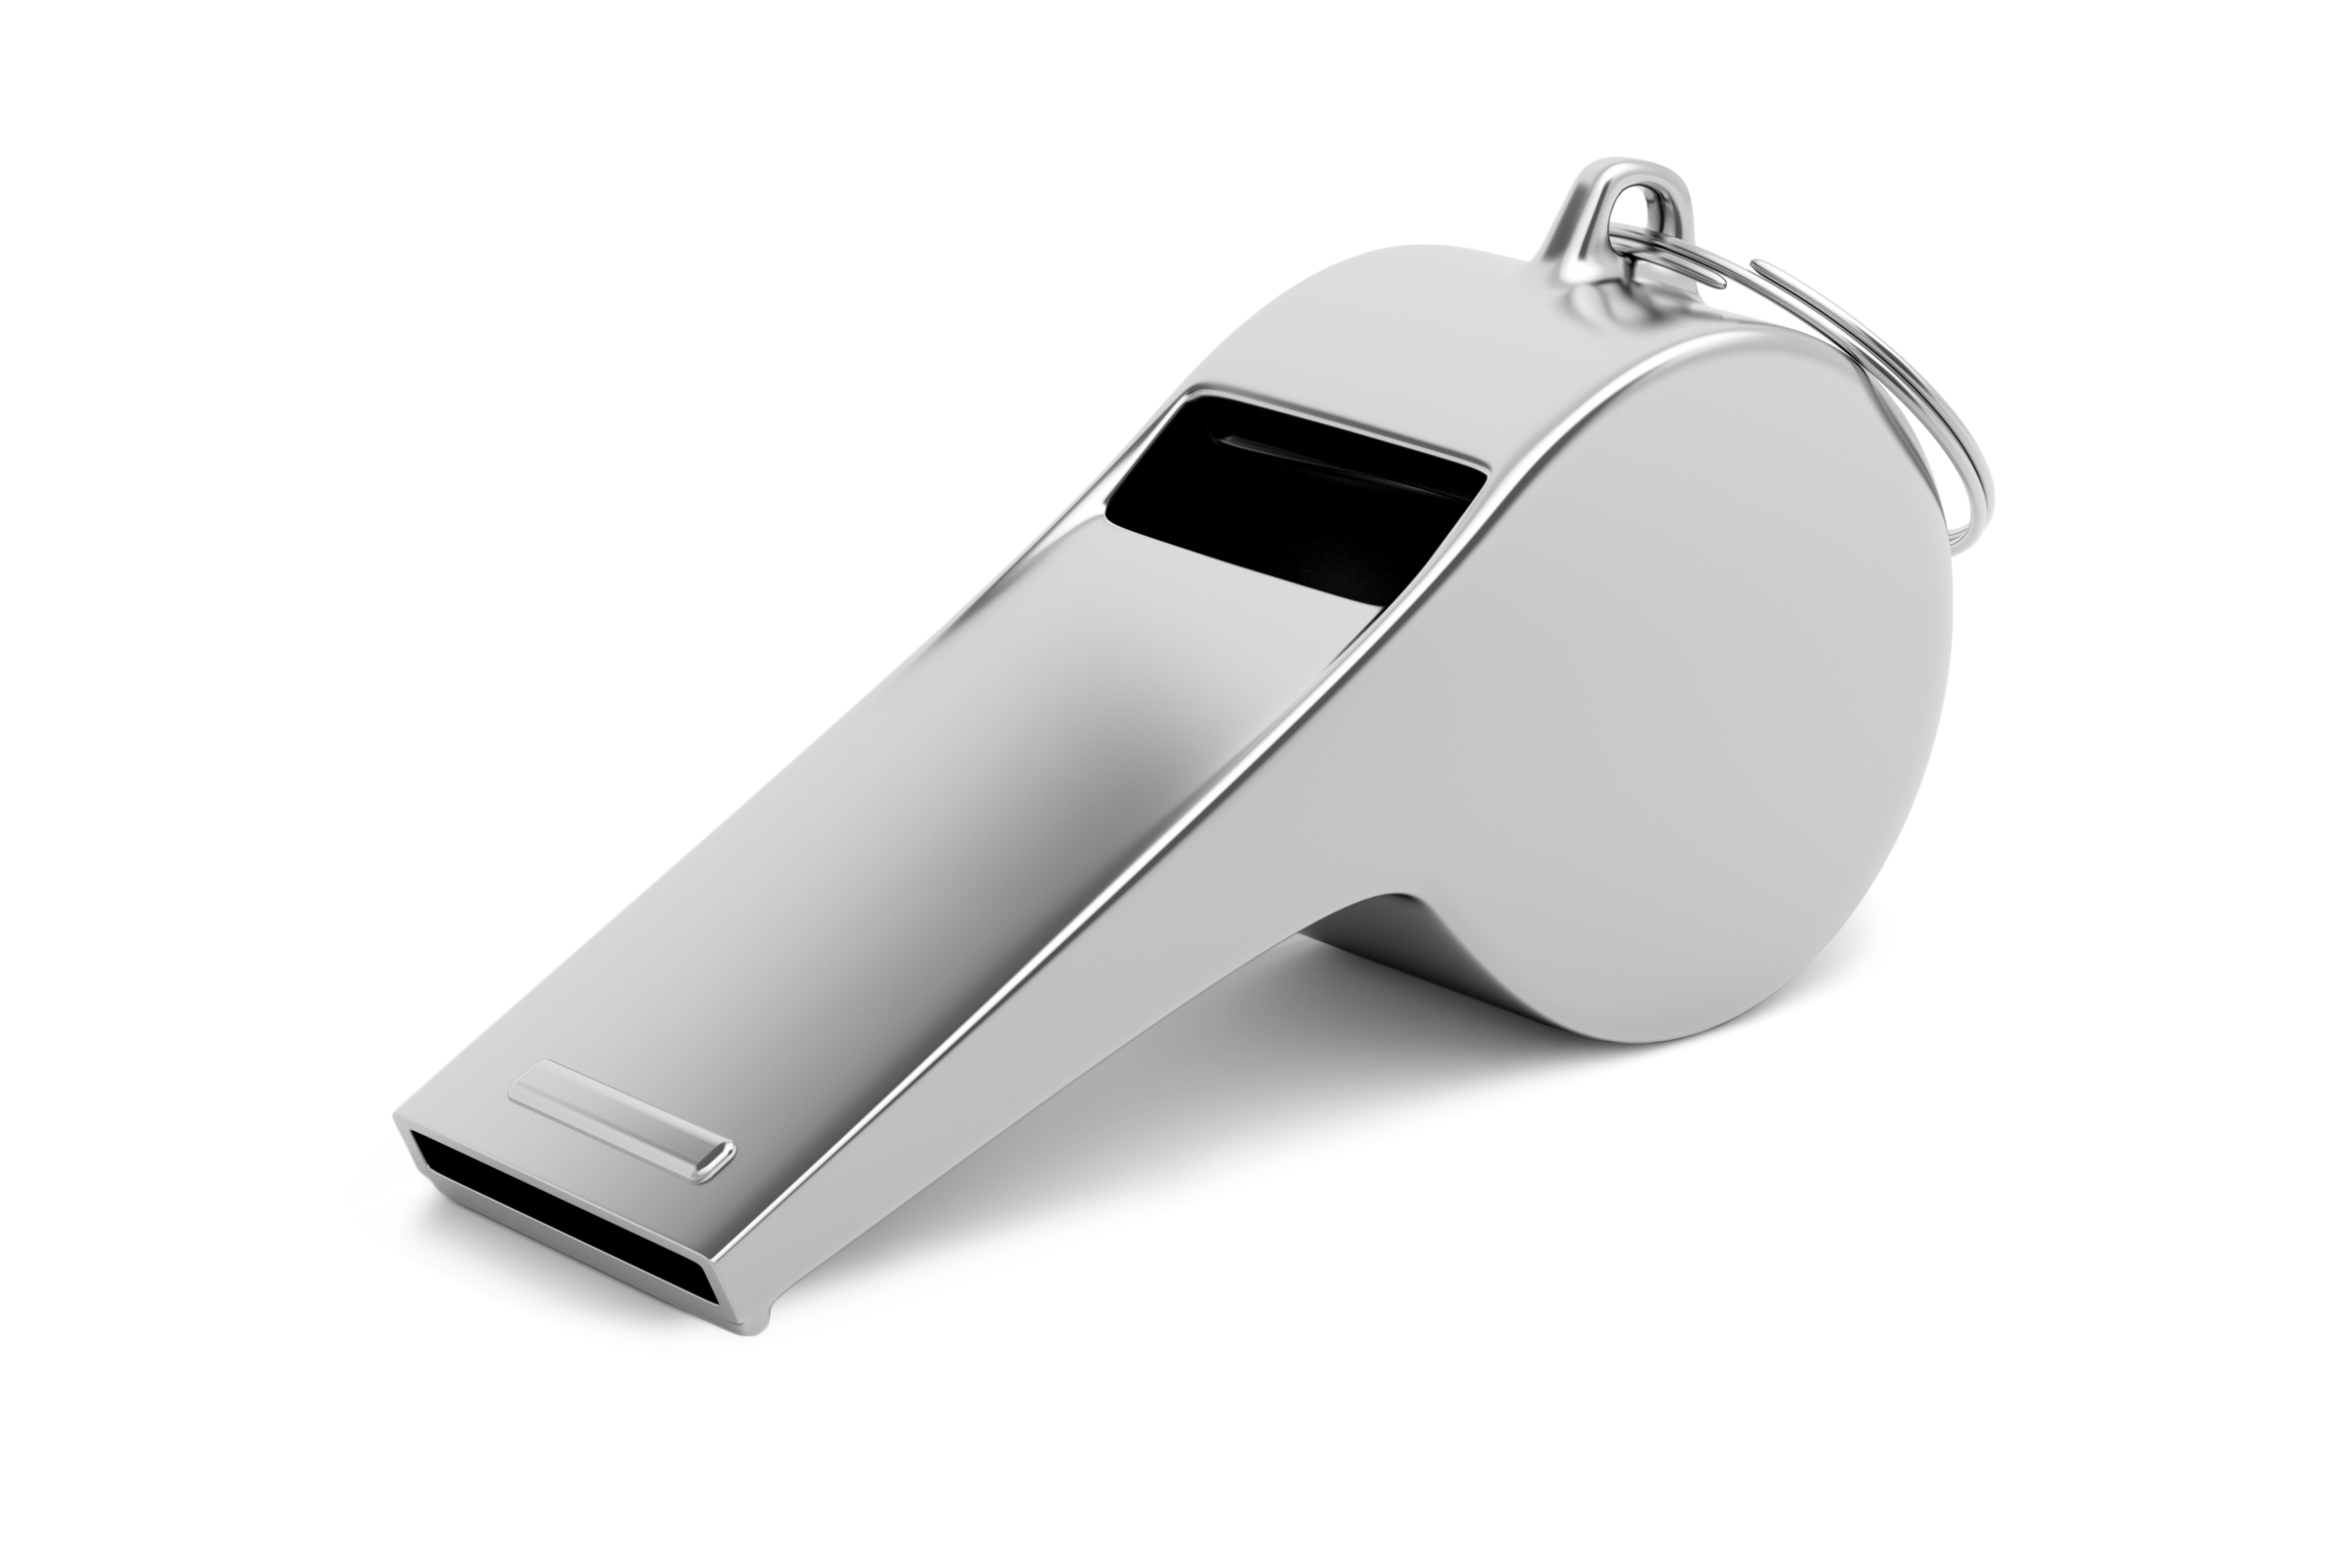 Whistle Image Png & Free Whistle Image.png Transparent Images #15147.